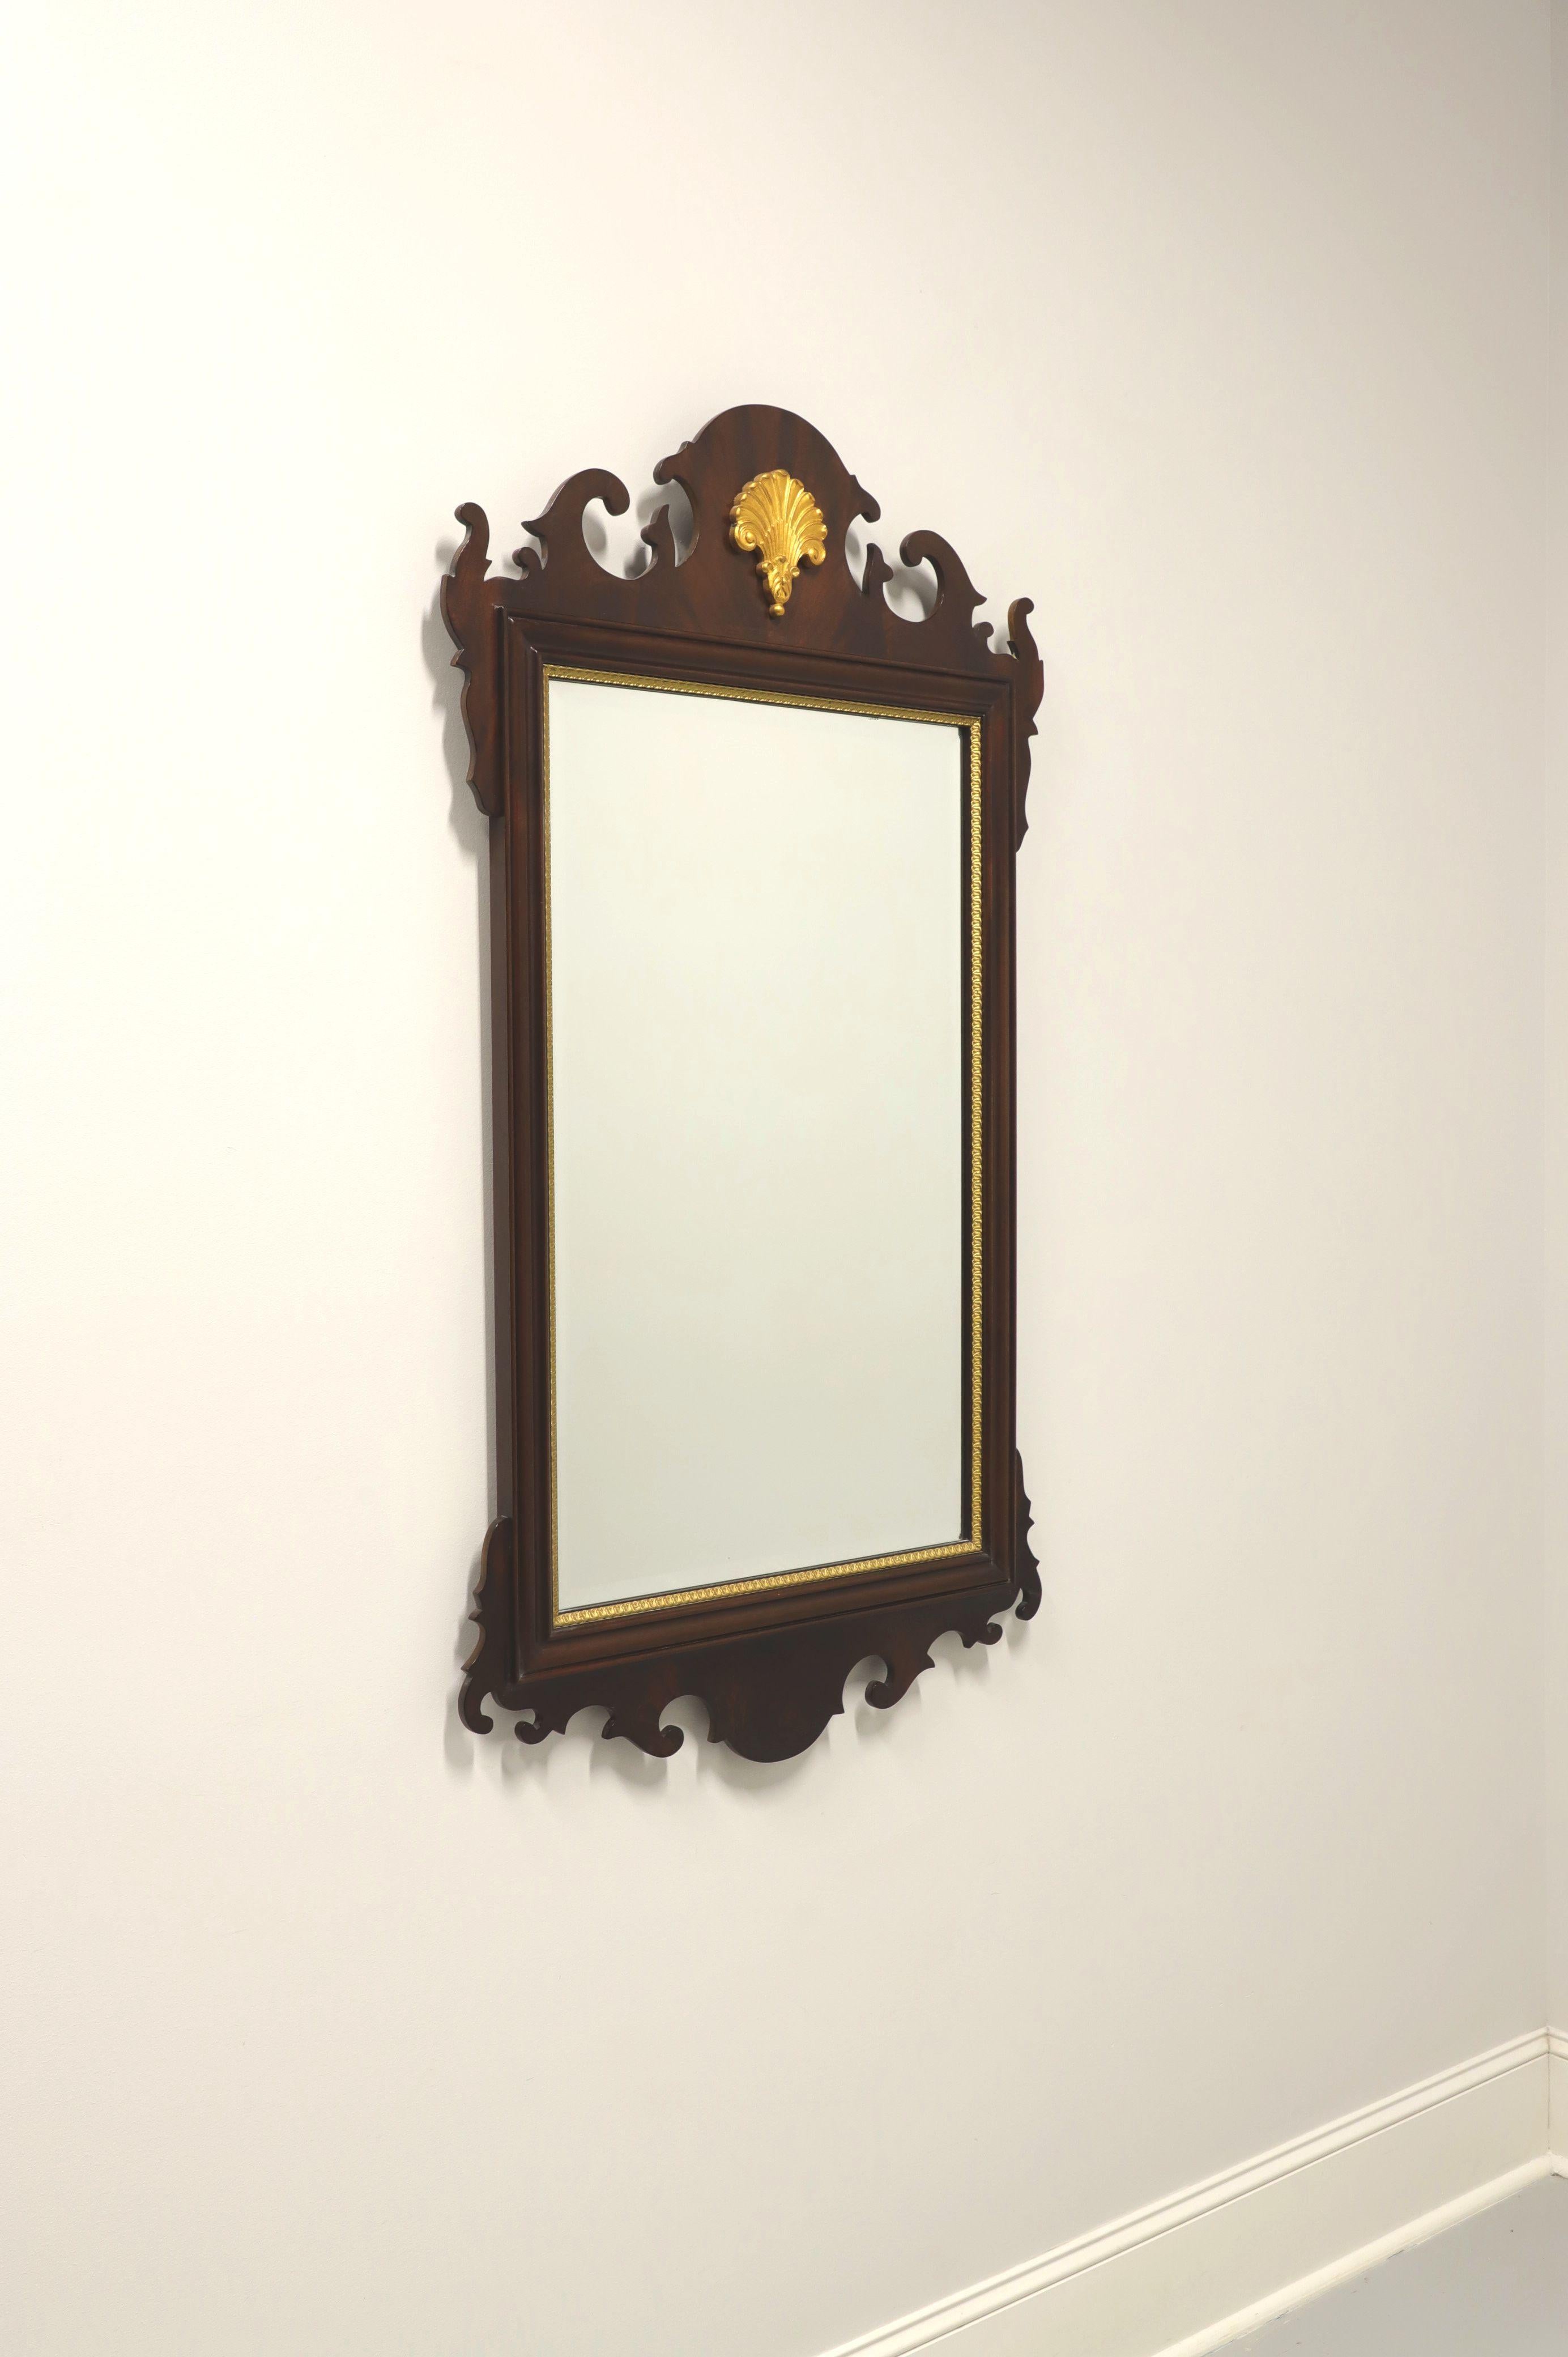 A large Chippendale style wall mirror by Councill Craftsmen. Bevel edge mirrored glass, mahogany frame with gold trim and top center gold plume. Made in Denton, North Carolina, USA, in the late 20th Century. 

Measures: 28.75w 1.5d 52h, Weighs